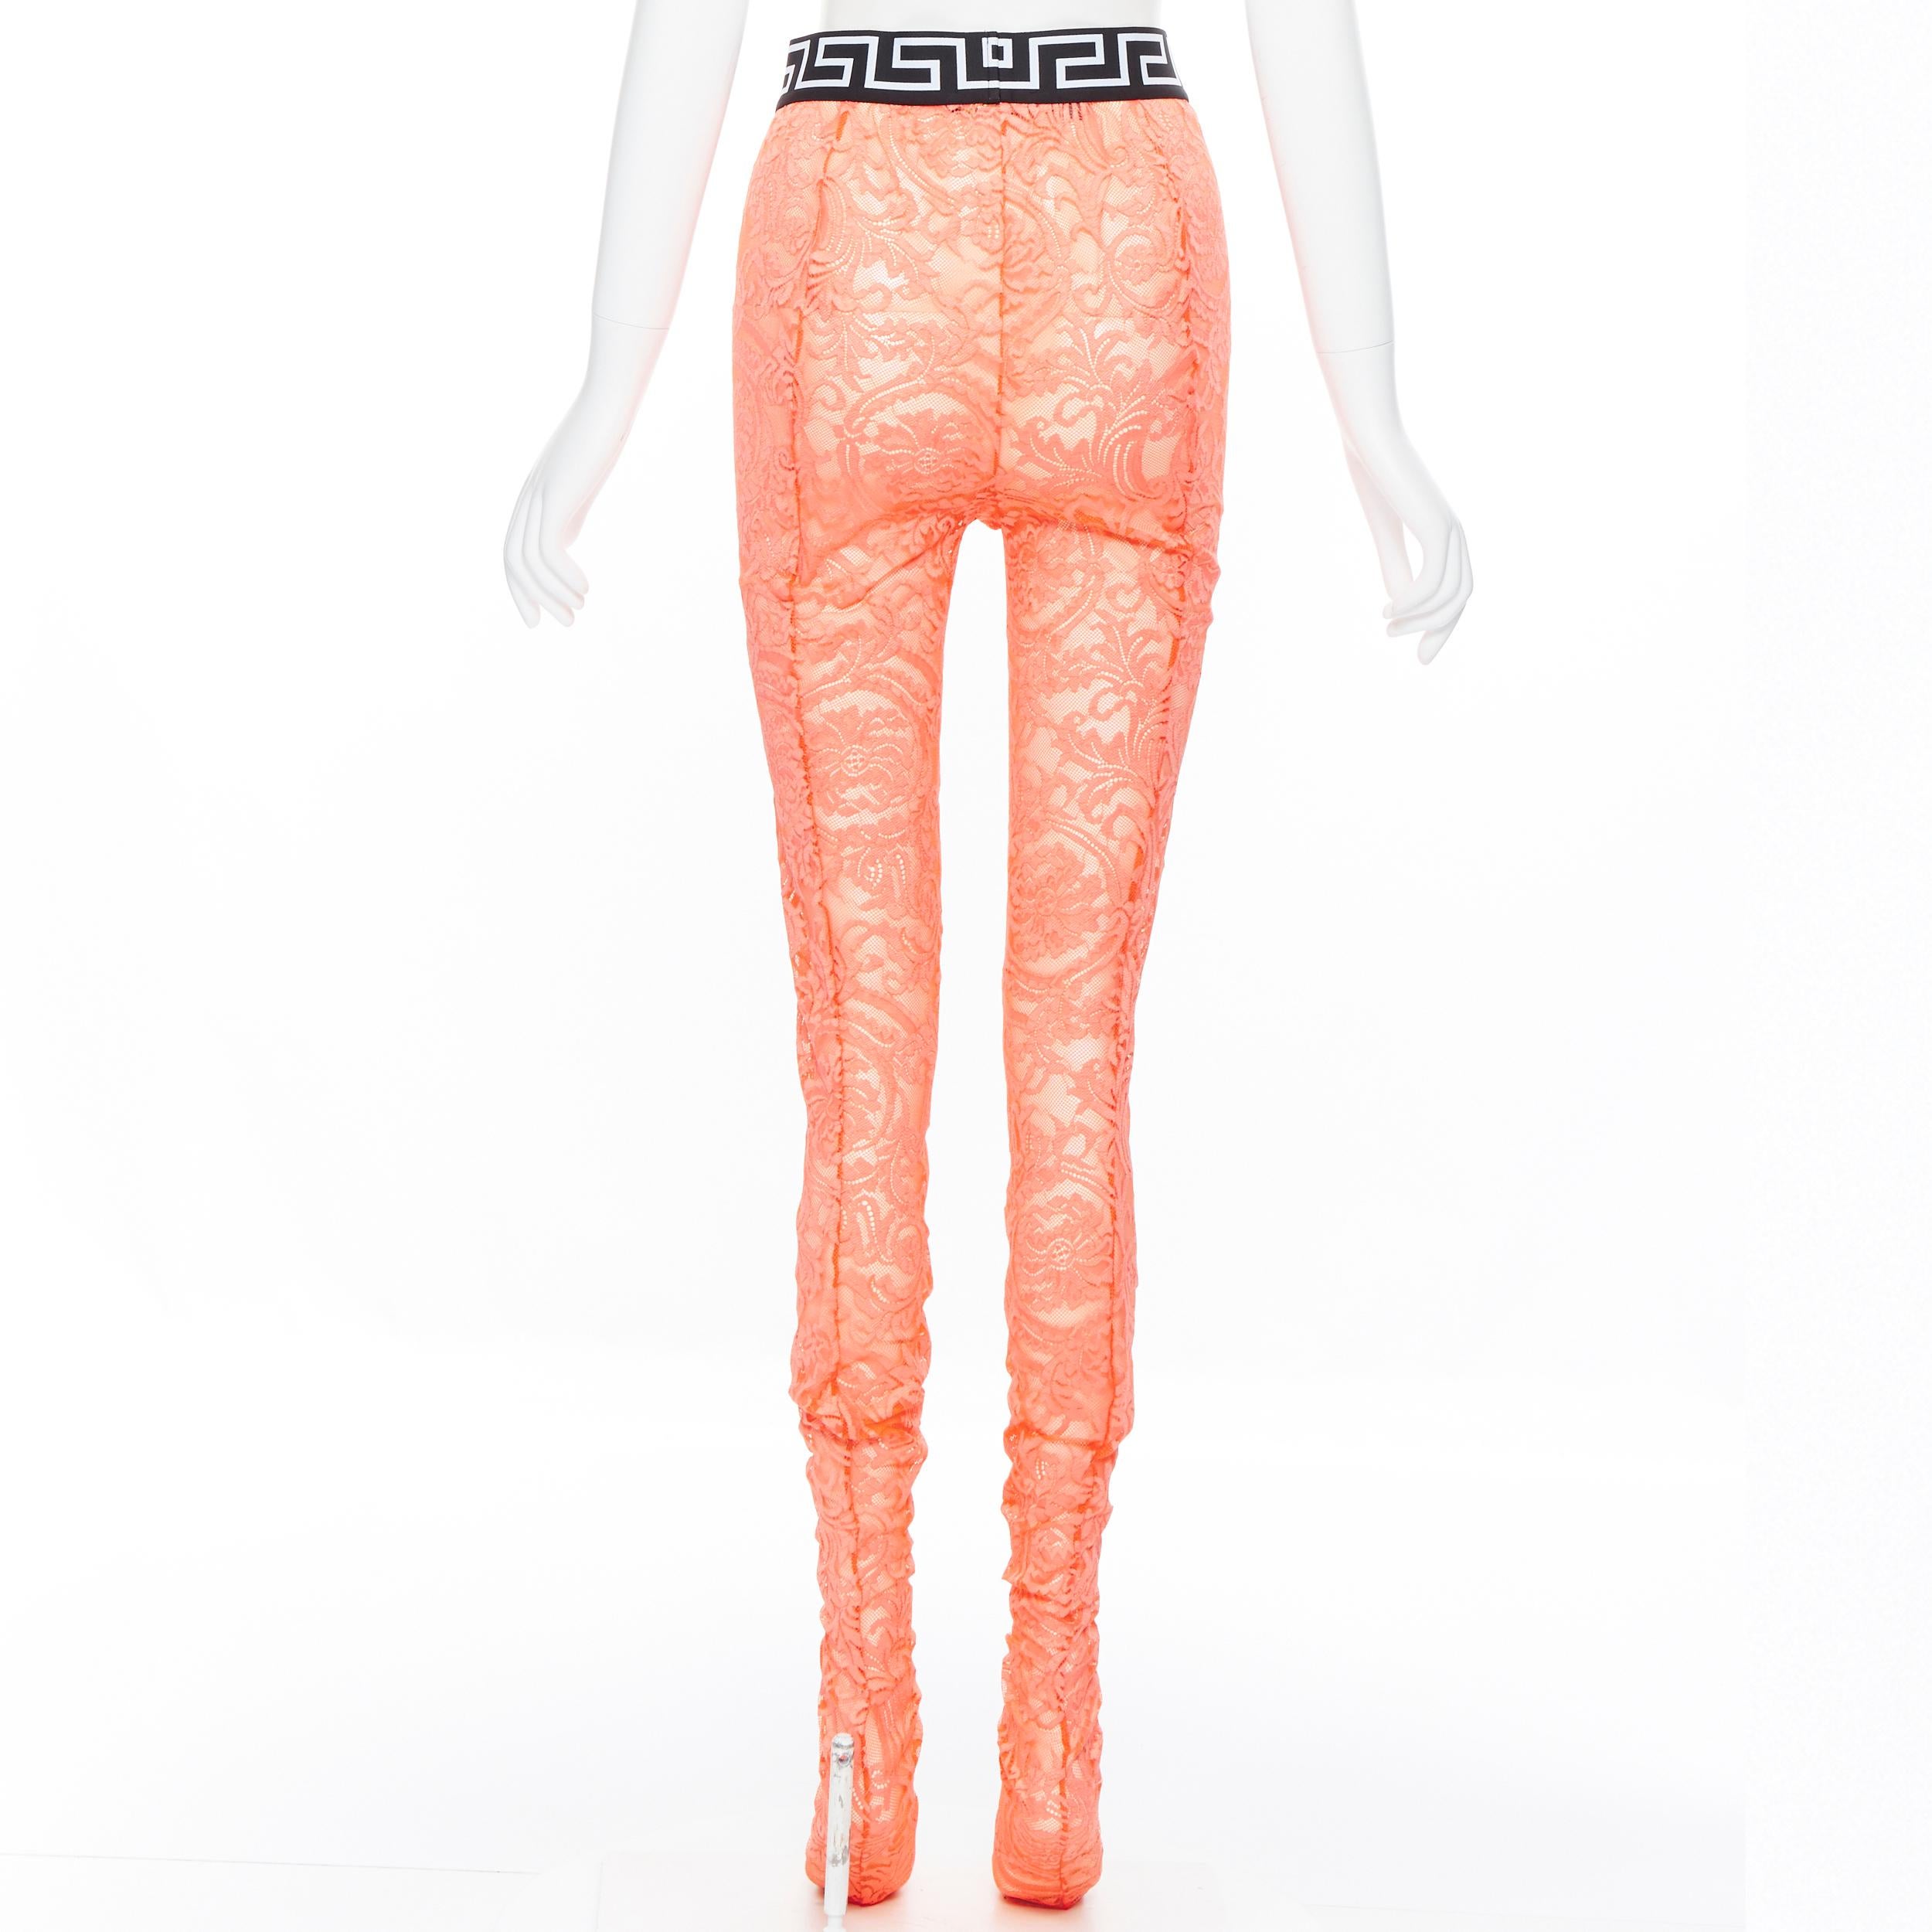 versace lace tights